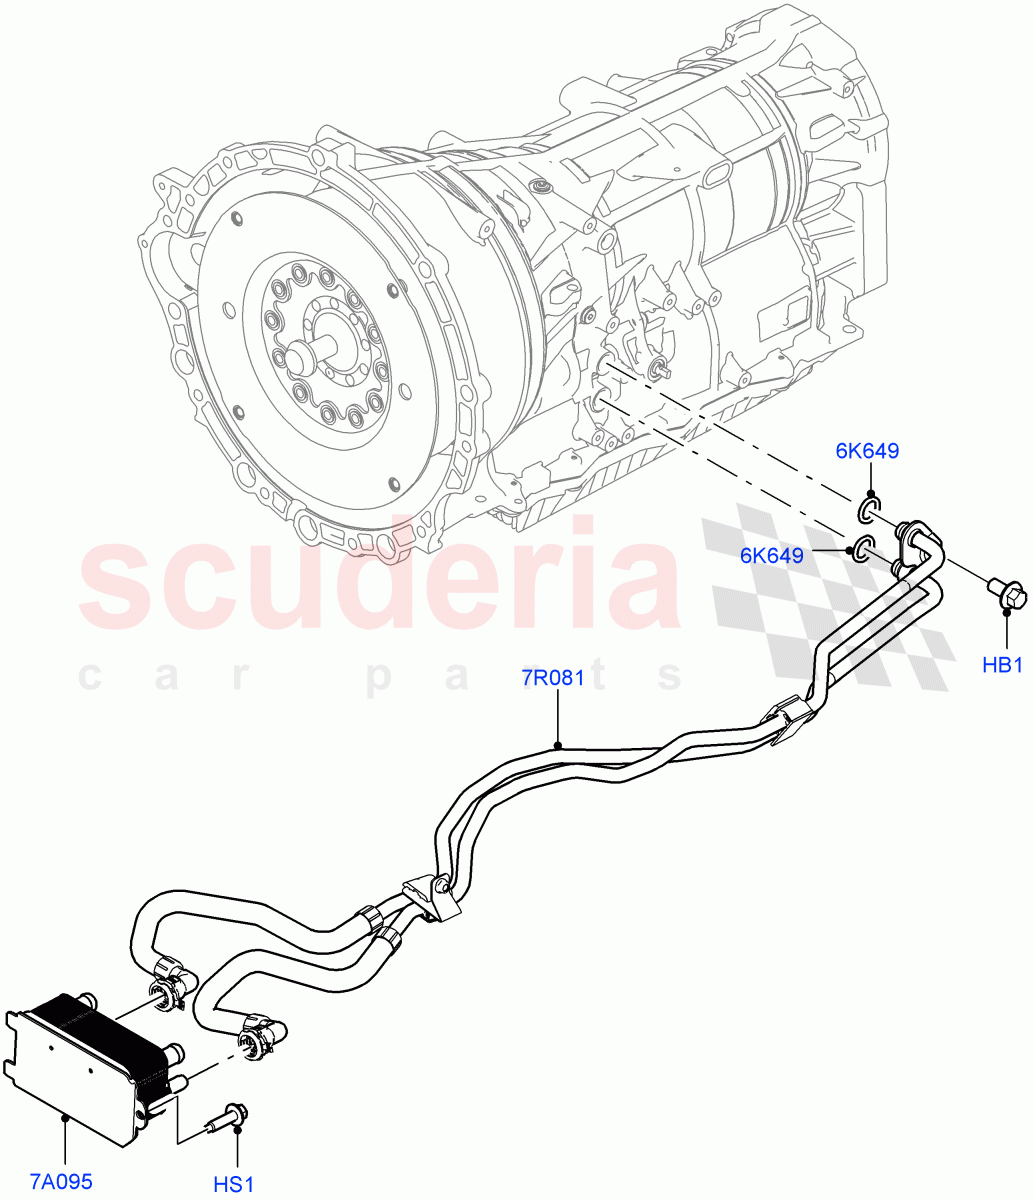 Transmission Cooling Systems(Solihull Plant Build)(2.0L I4 High DOHC AJ200 Petrol,8 Speed Auto Trans ZF 8HP45)((V)FROMJA000001) of Land Rover Land Rover Range Rover Sport (2014+) [2.0 Turbo Petrol AJ200P]